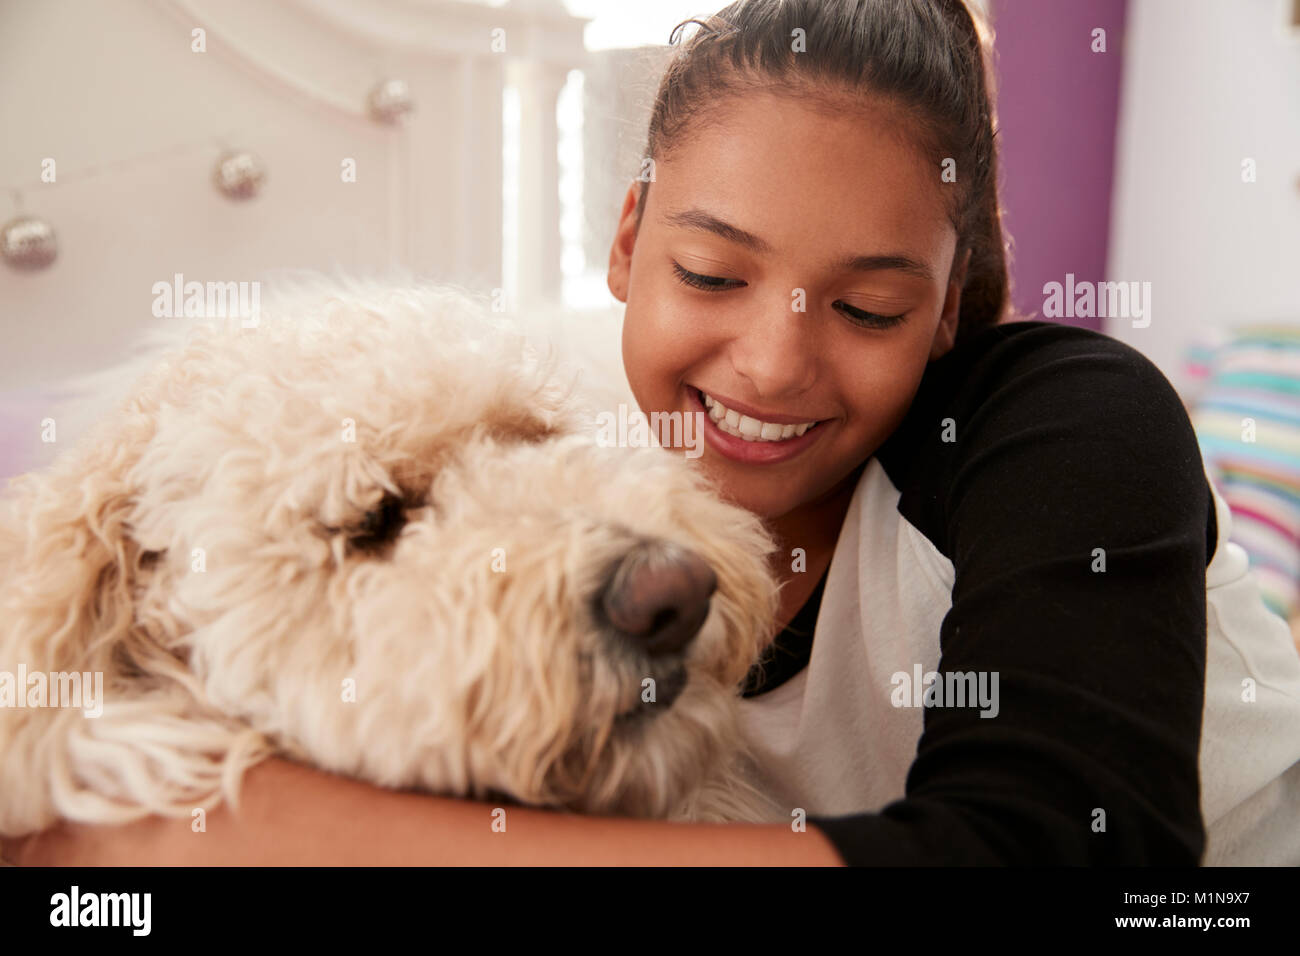 Young teen girl embracing pet dog on her bed, close up Stock Photo